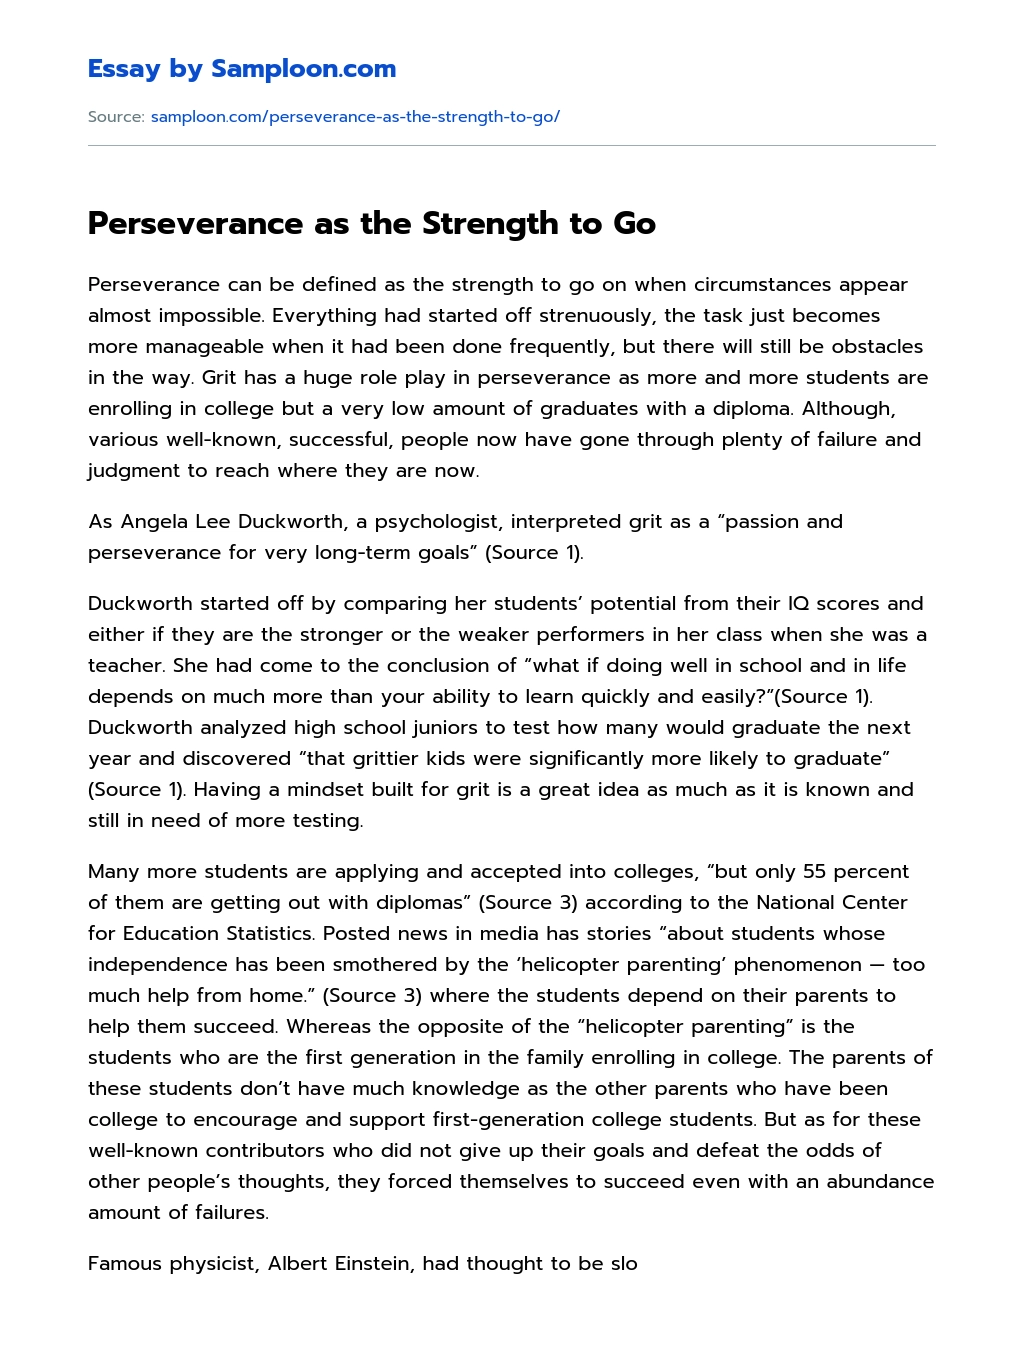 Perseverance as the Strength to Go essay